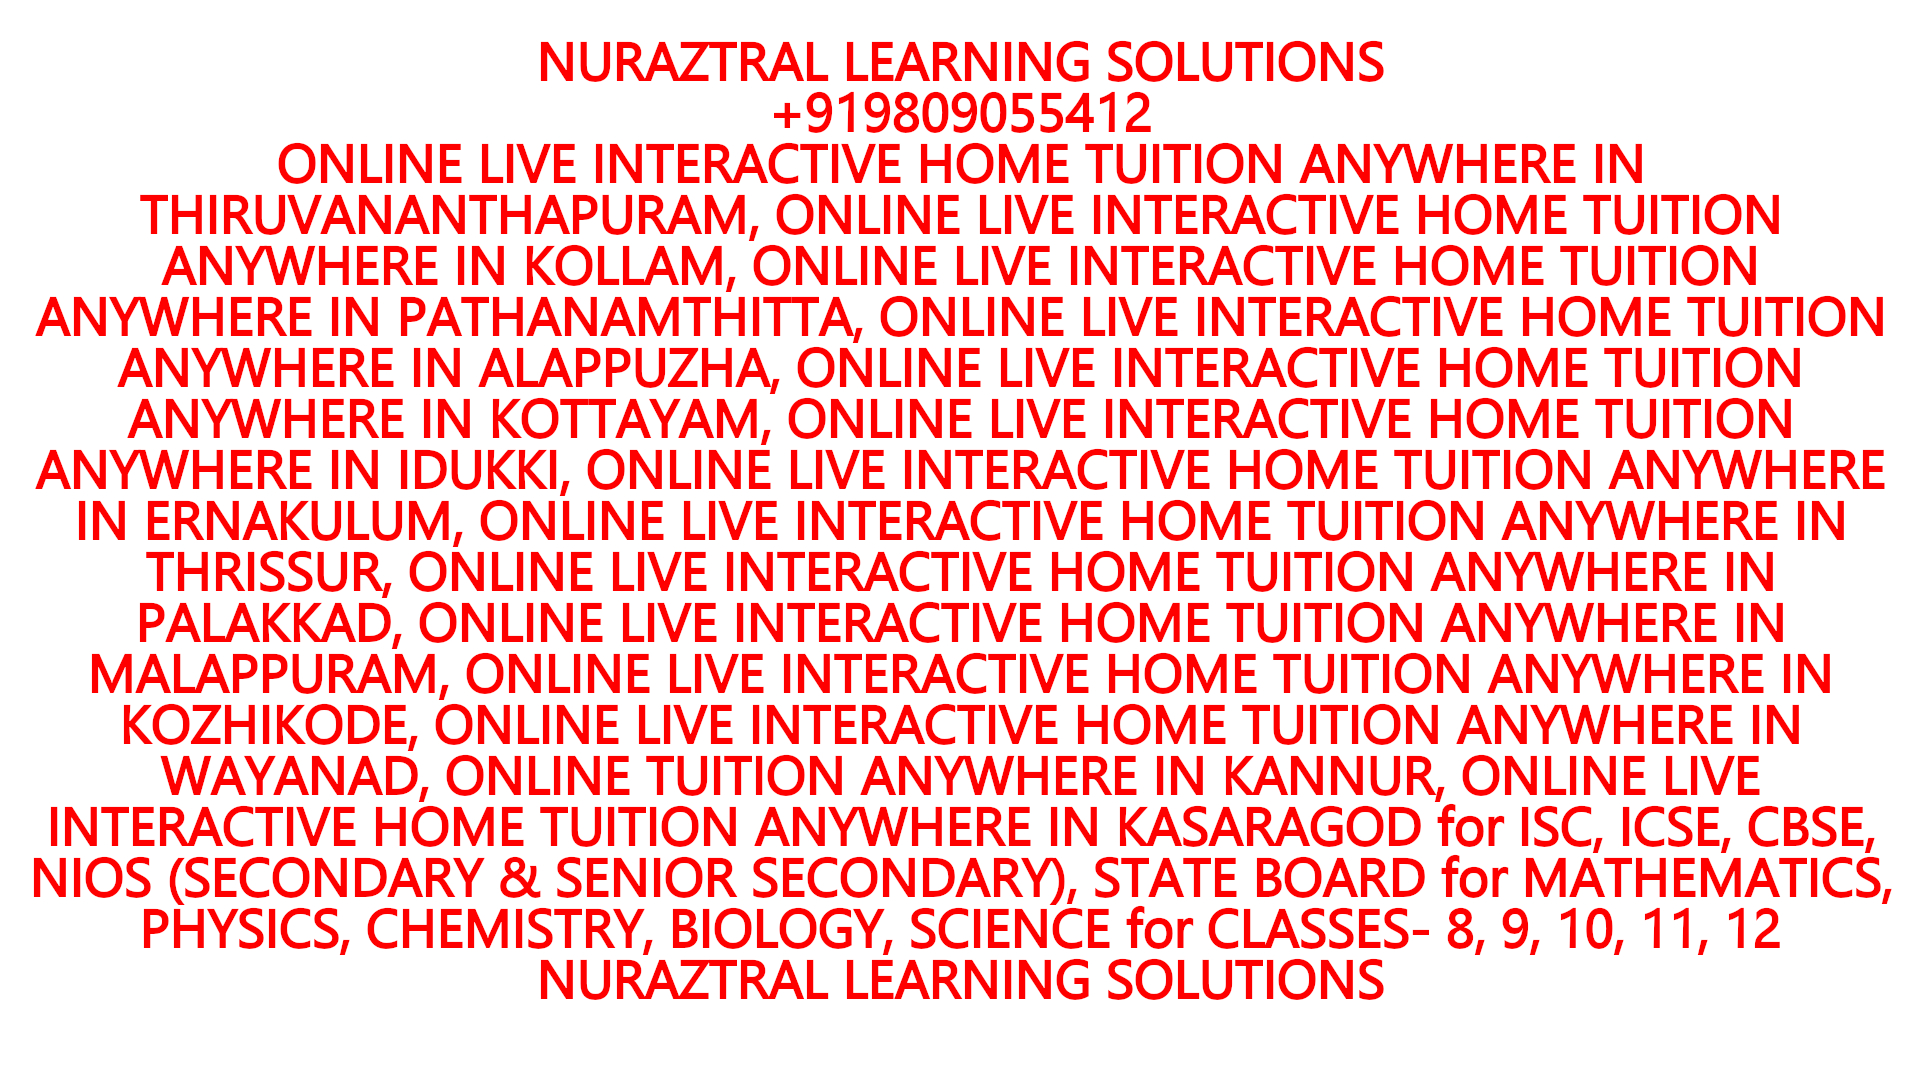 HOME TUITION IN THRISSUR- ICSE, CBSE, STATE BOARD STUDENTS of CLASSES:VIII, IX, X, XI, XII-NURAZTRAL